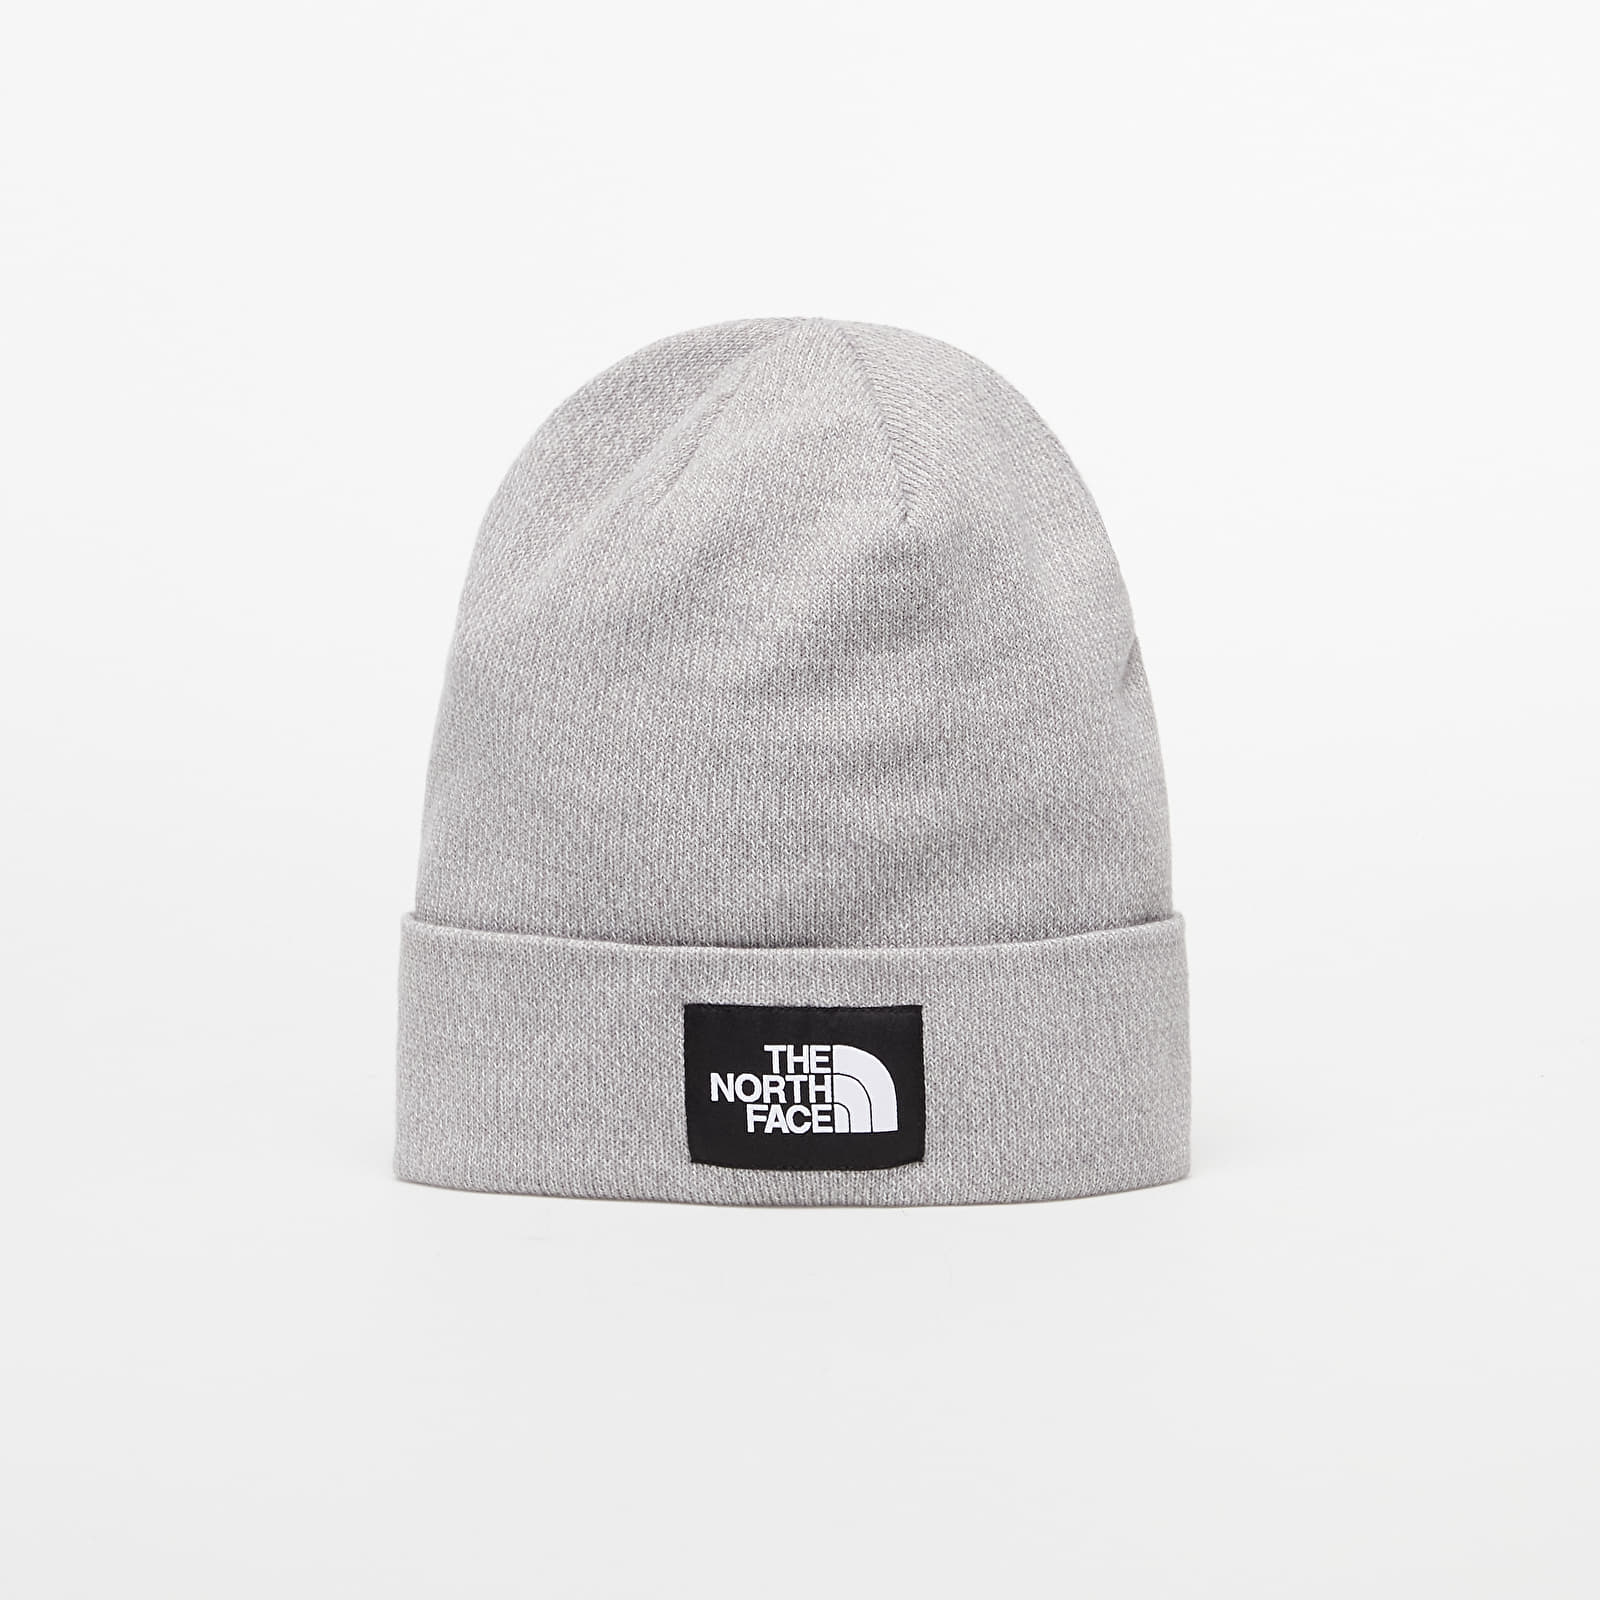 Hats The North Face Dock Worker Recycled Beanie TNF Light Grey Heather